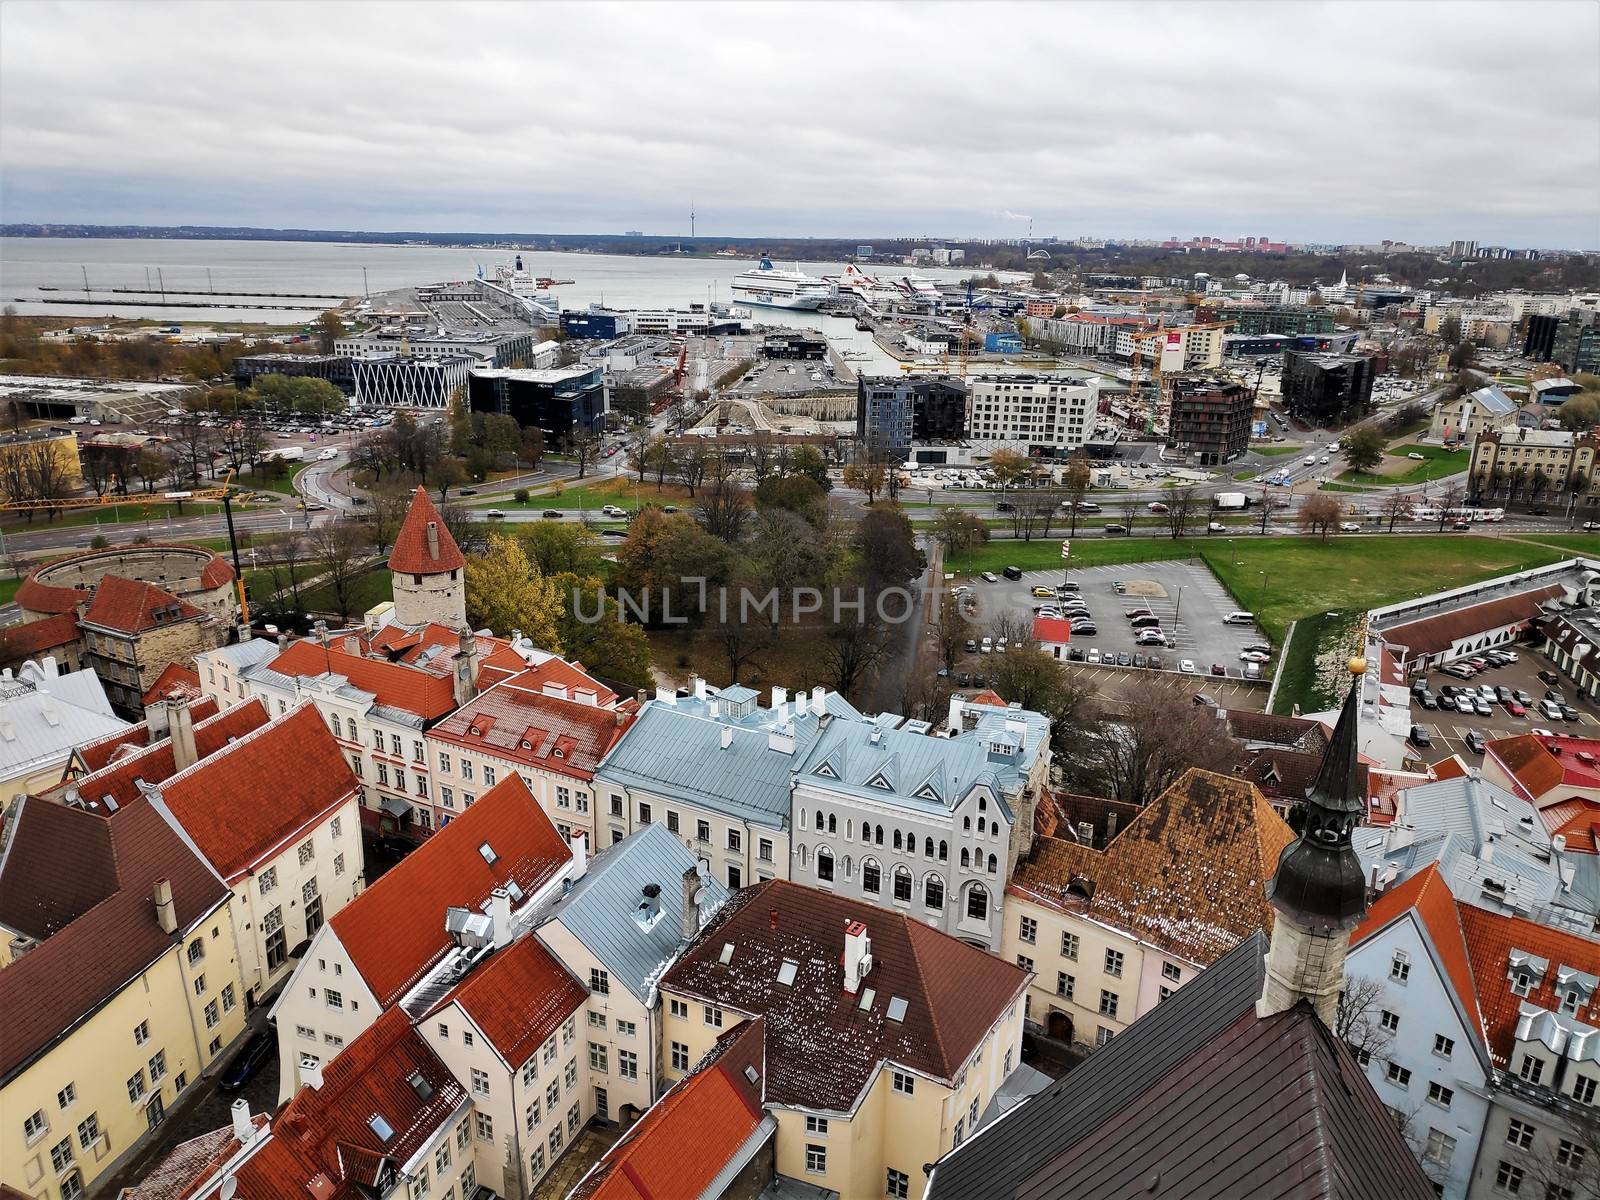 View from St Olaf's church to the port of Tallinn by pisces2386